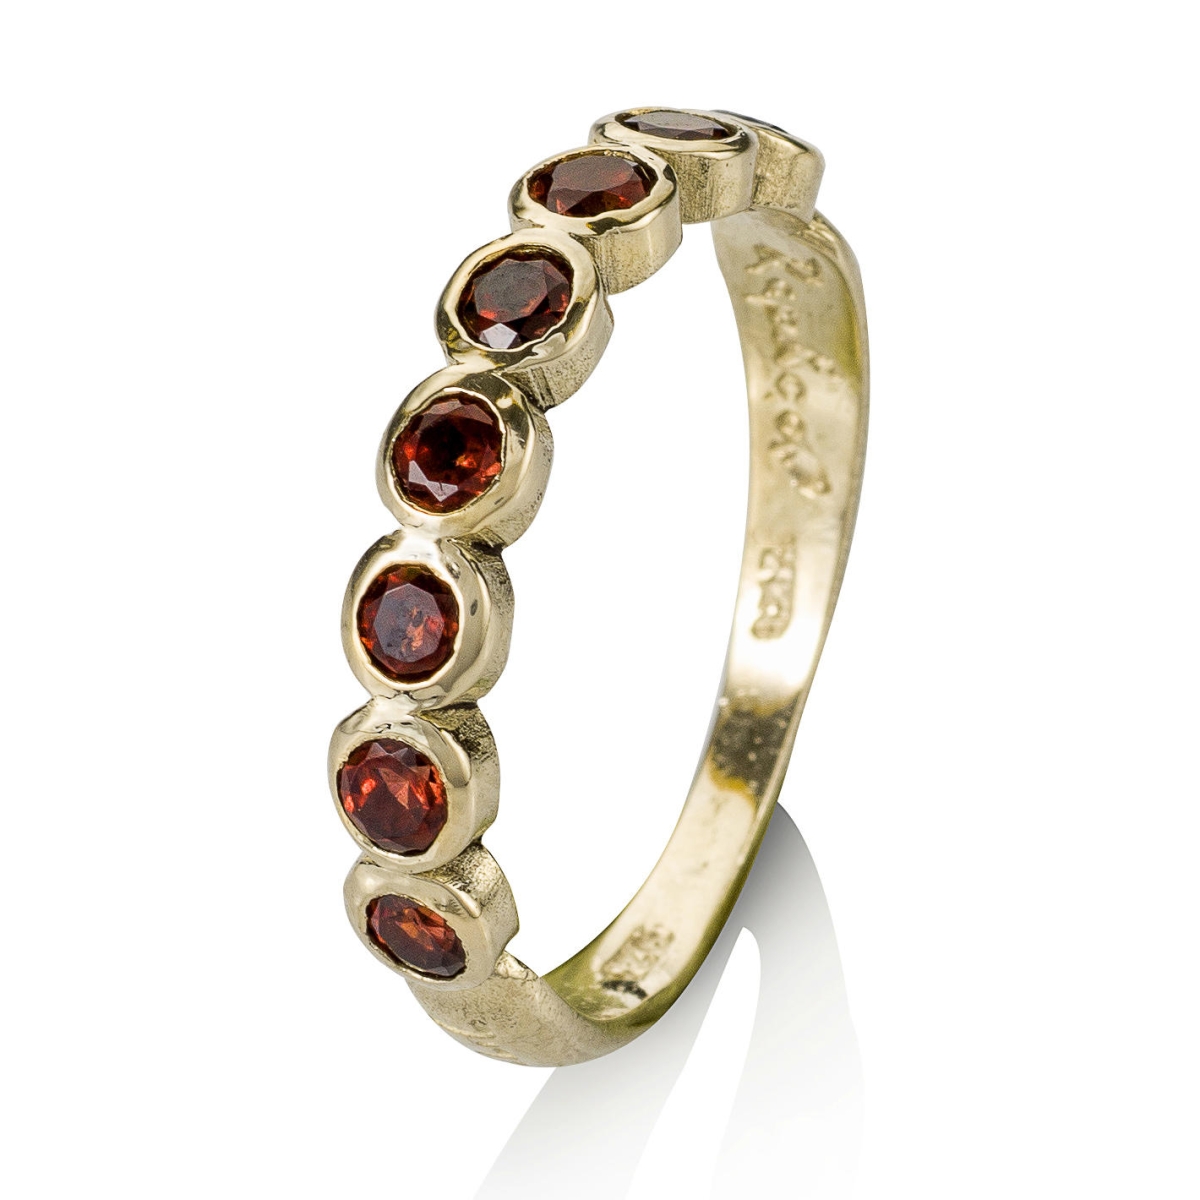 14K Yellow Gold Rose of Jericho Ring with Garnet Stones - 1